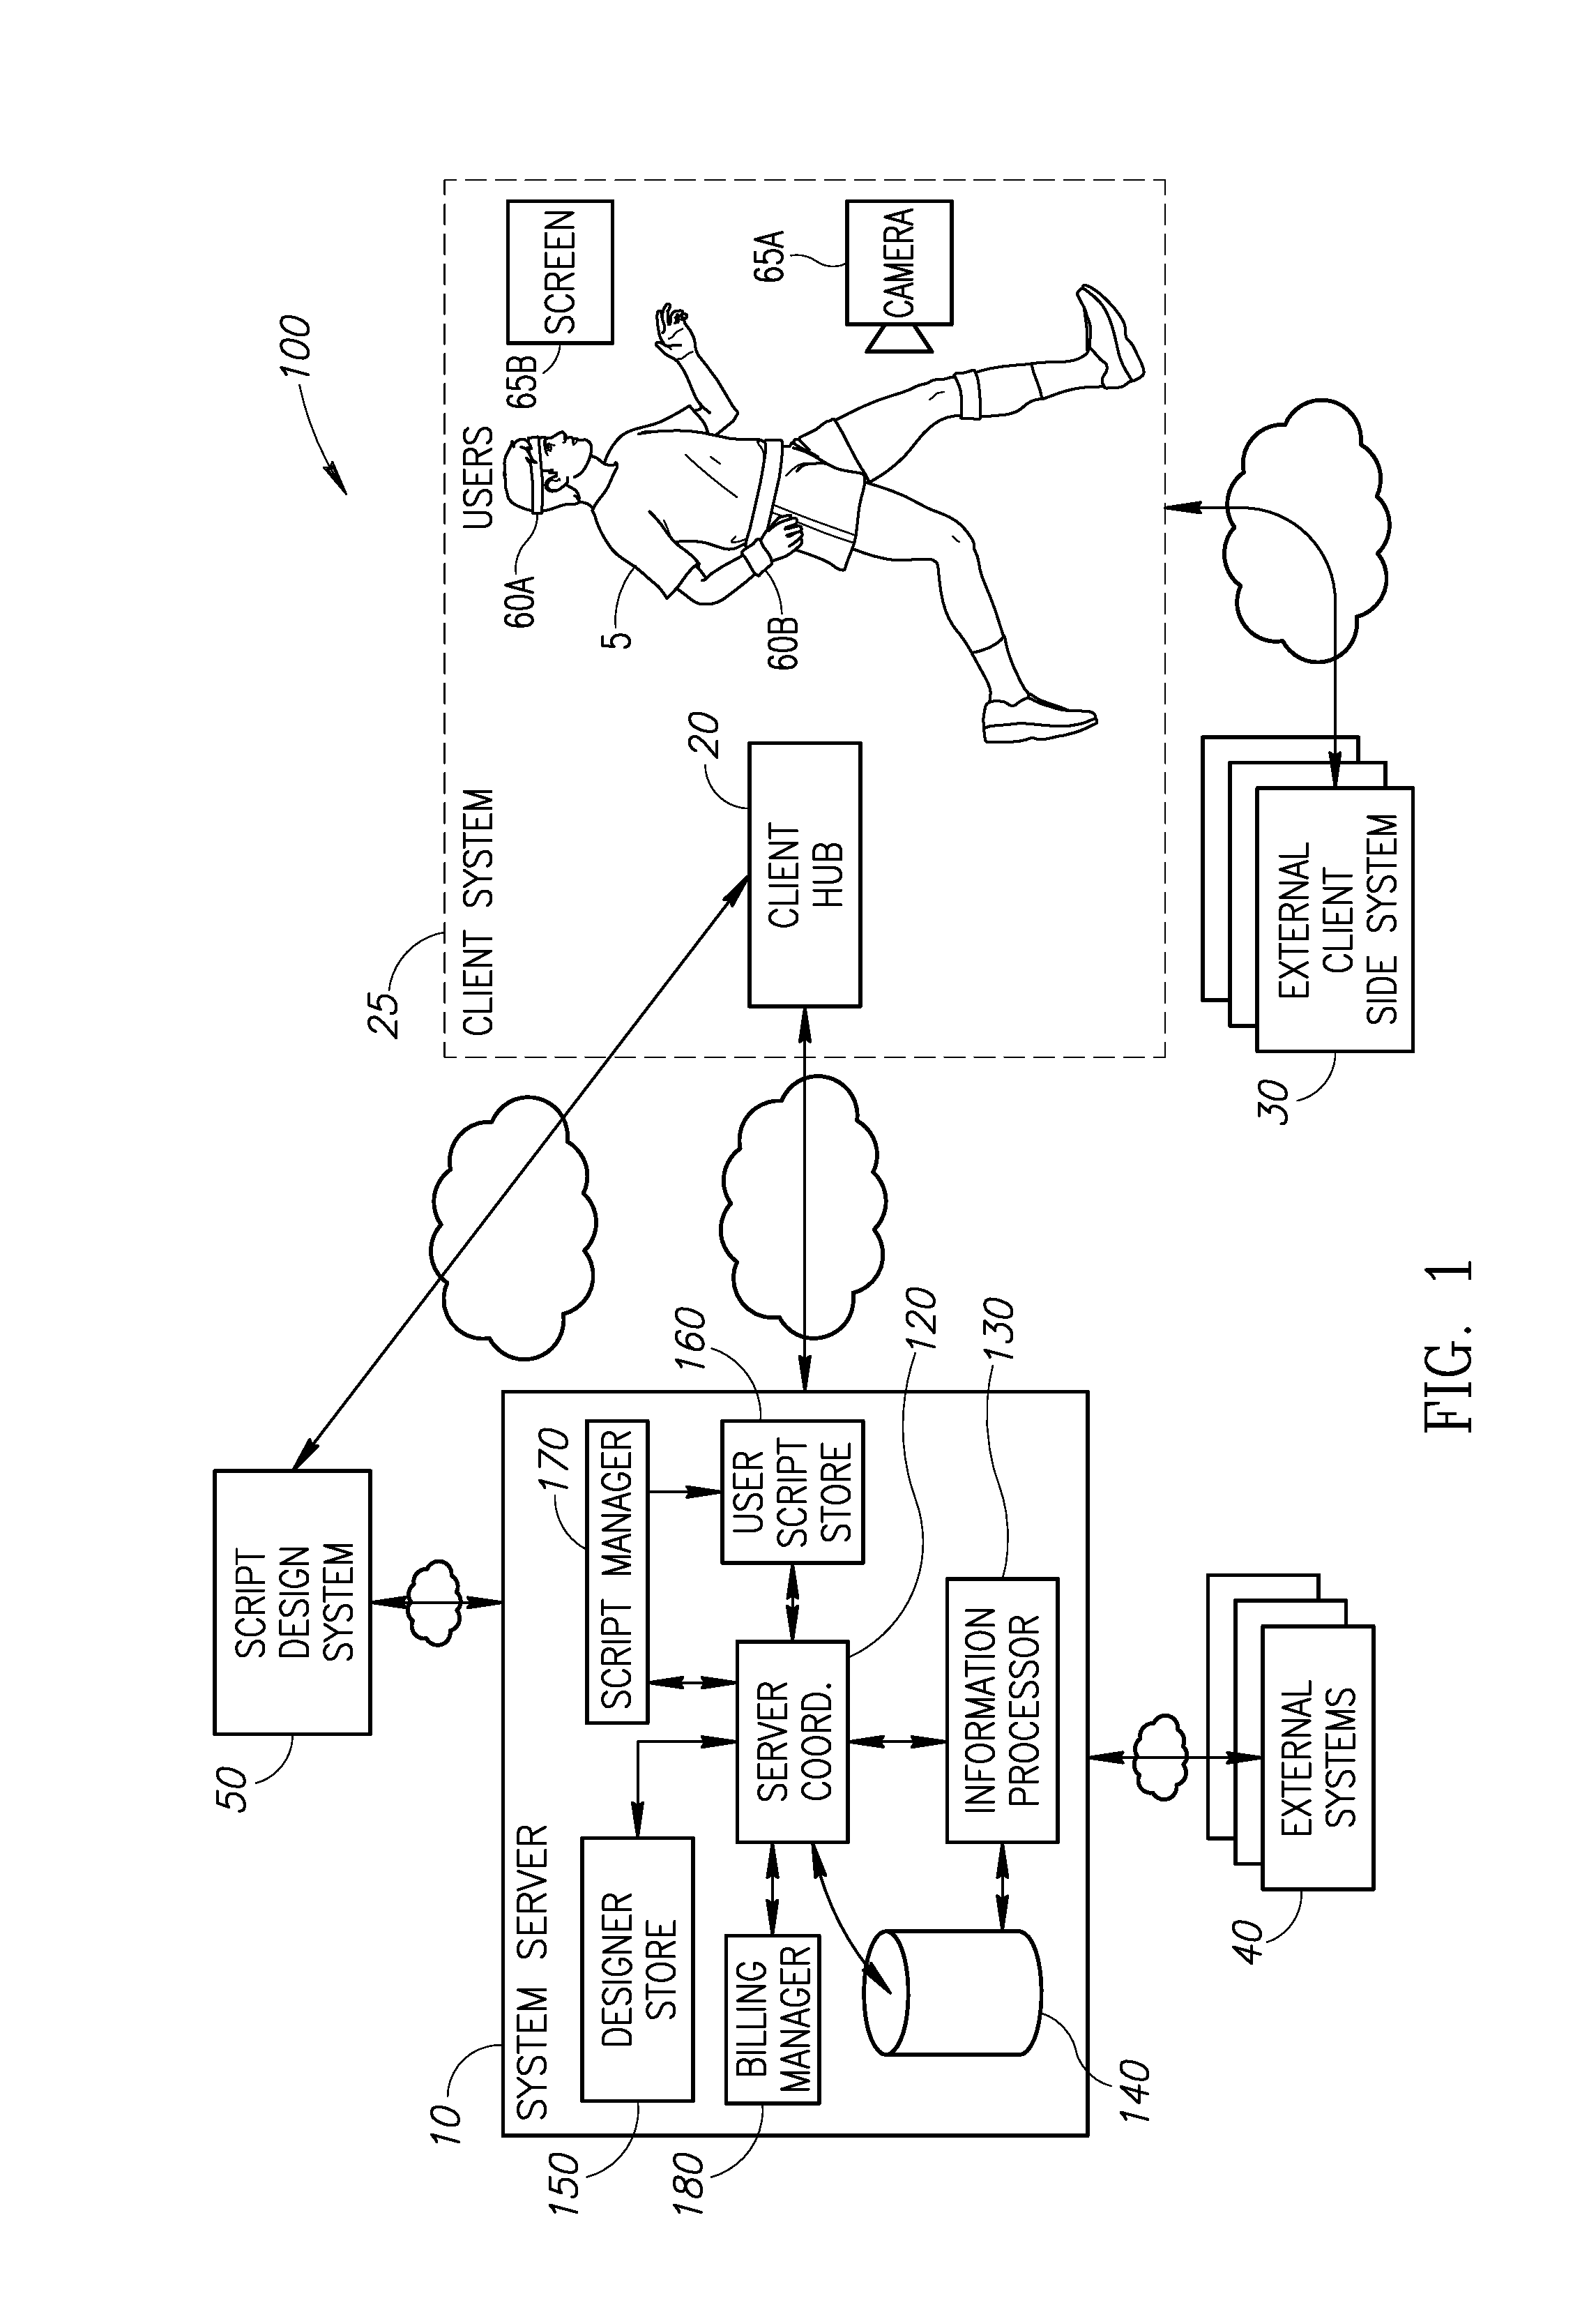 Cognitive state alteration system integrating multiple feedback technologies